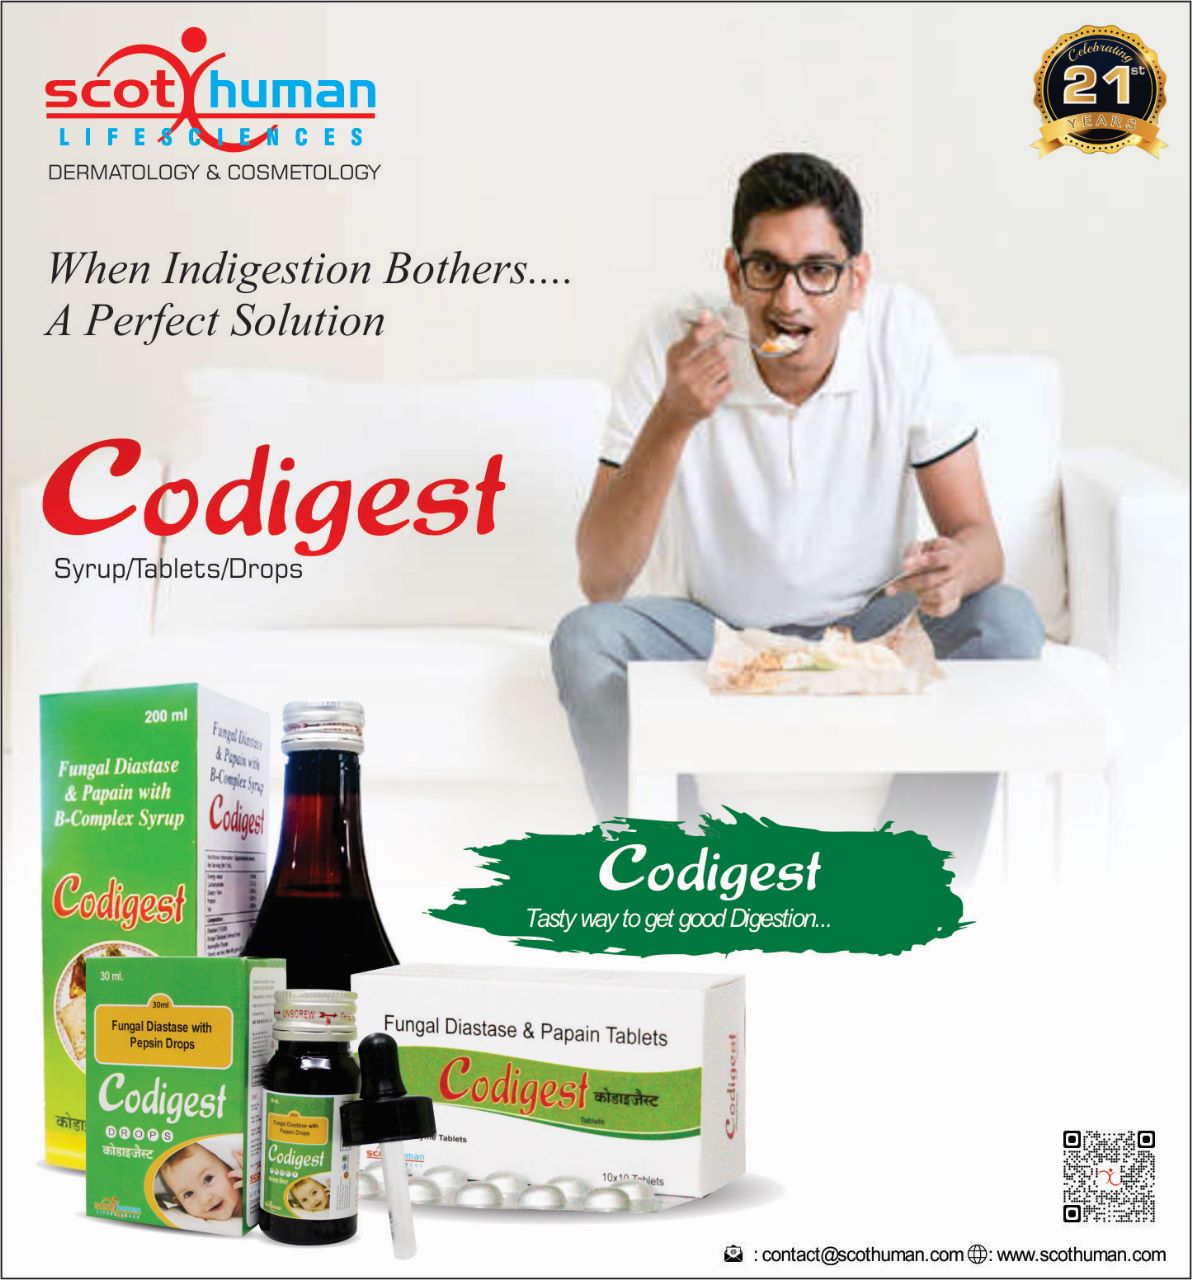 Product Name: Codigest, Compositions of Fungal Diastase with Pepsin Syrup are Fungal Diastase with Pepsin Syrup - Pharma Drugs and Chemicals